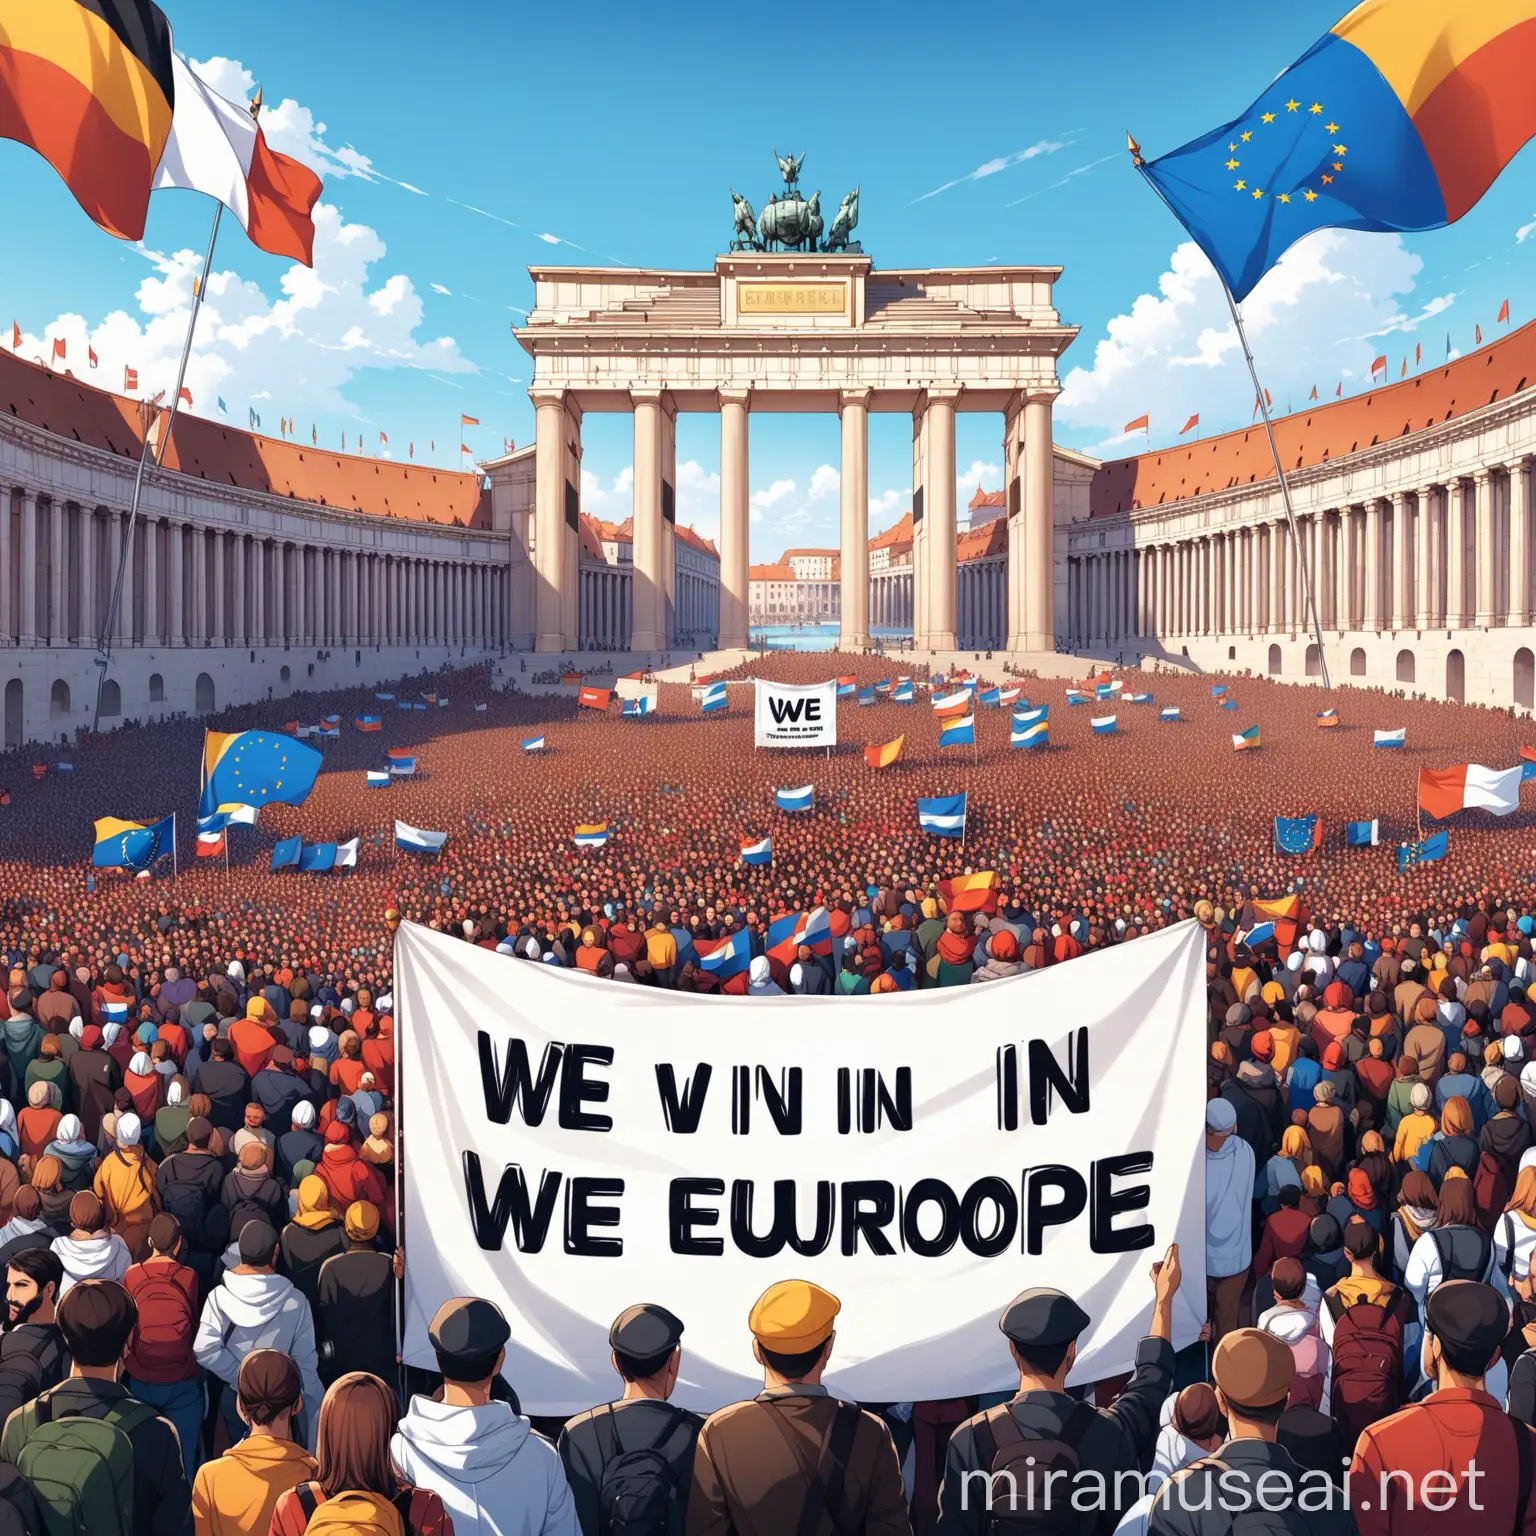 European Unity People with We in Europe Poster and European Flags